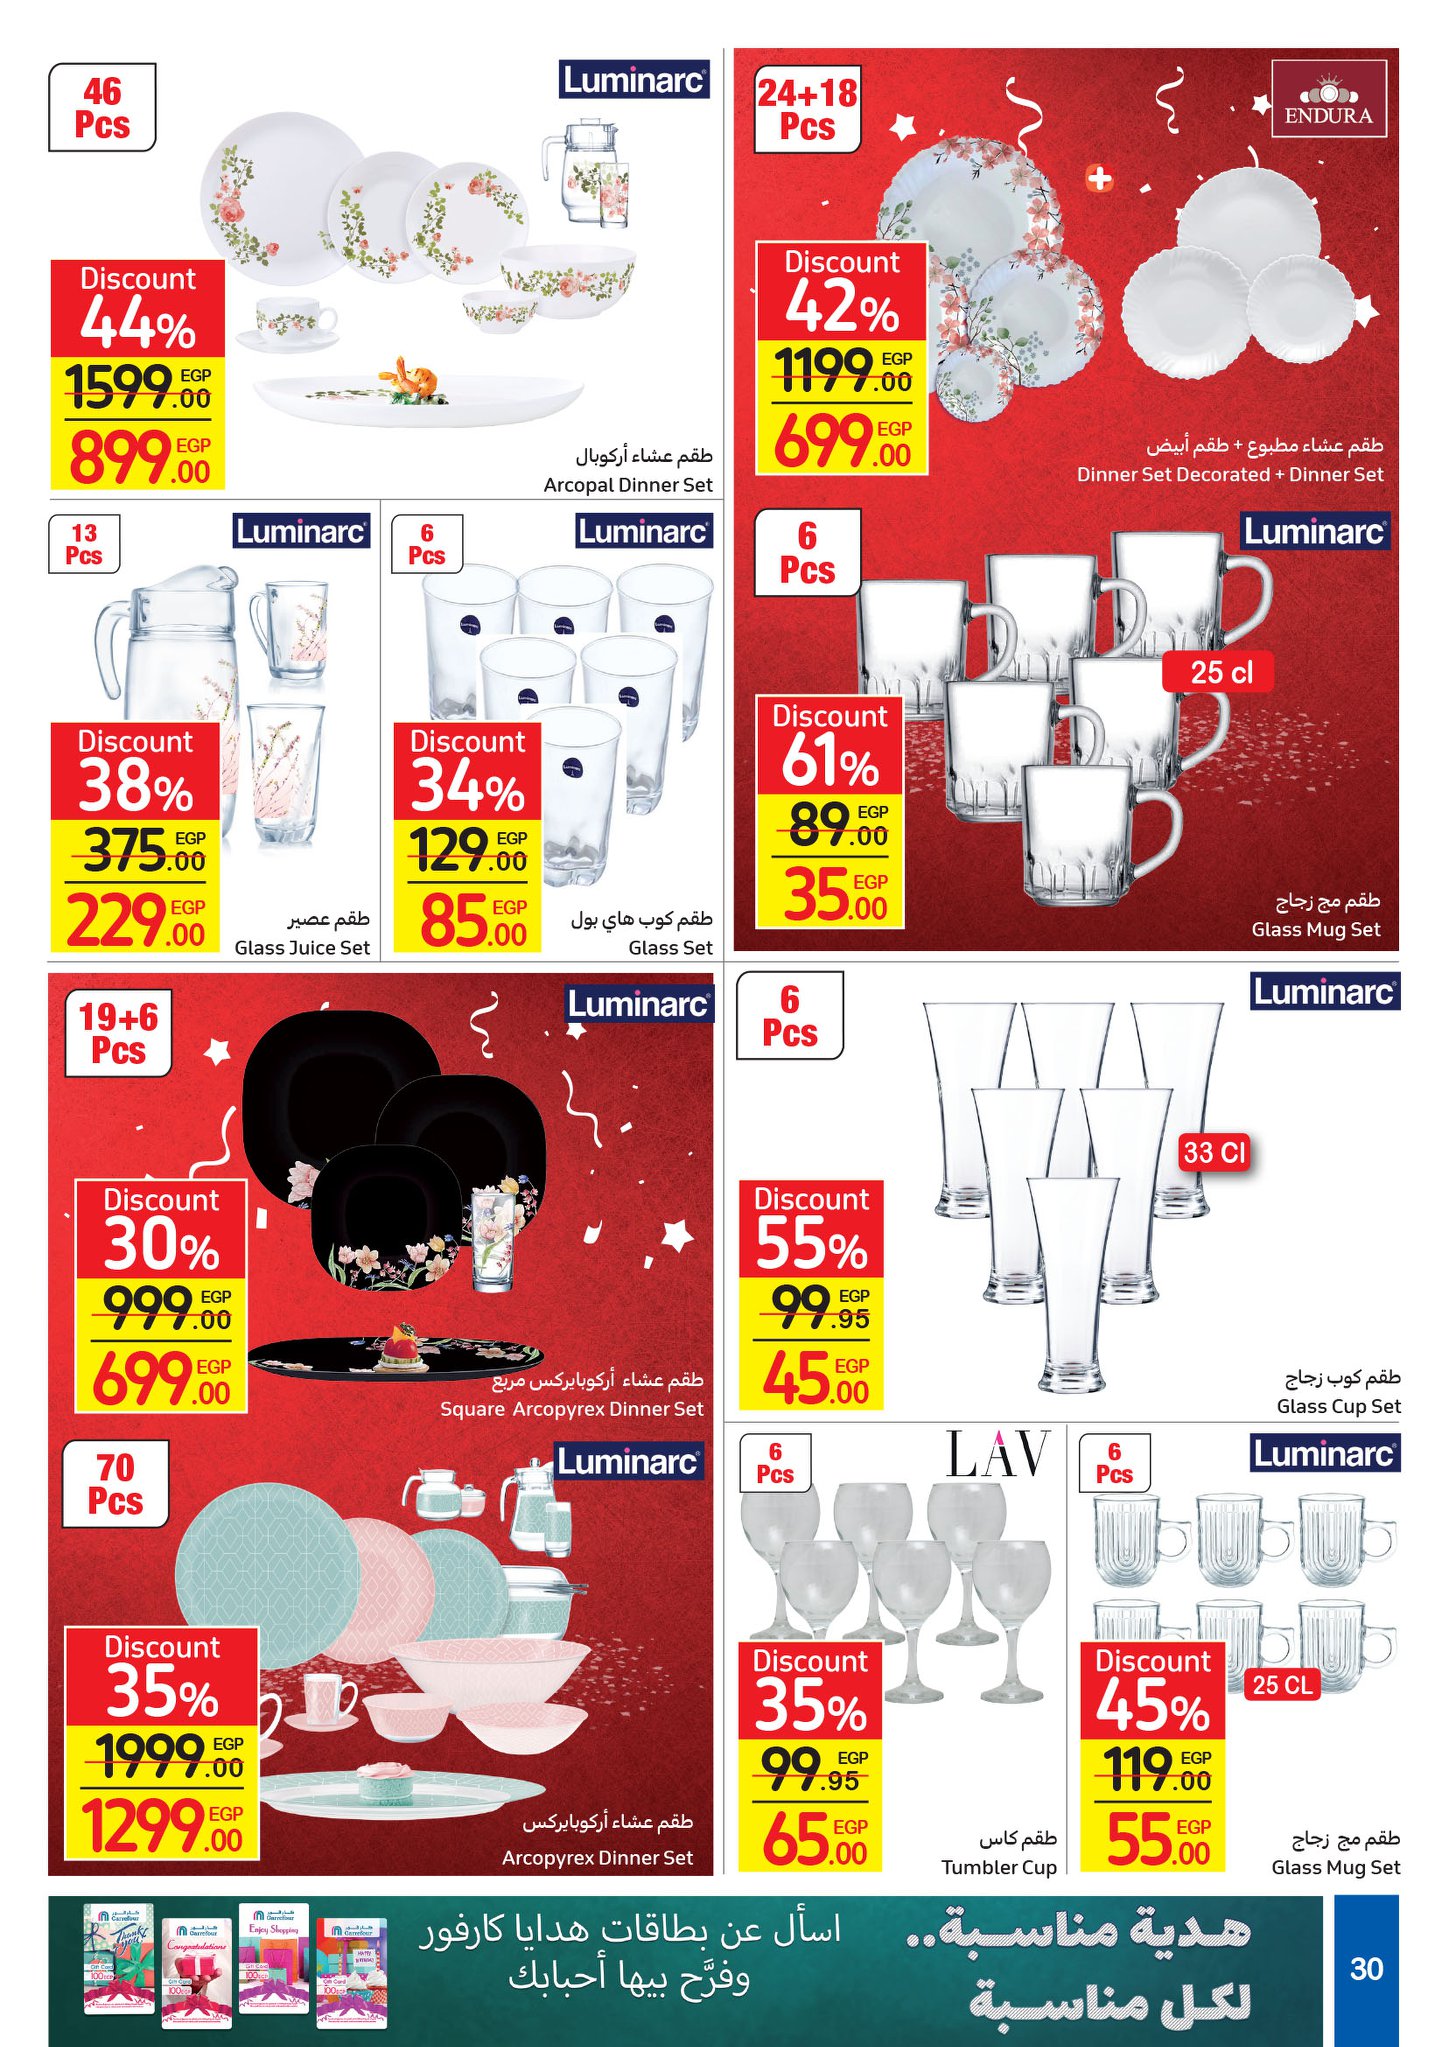 The entire Christmas catalog of Carrefour Christmas 2021 offers 28